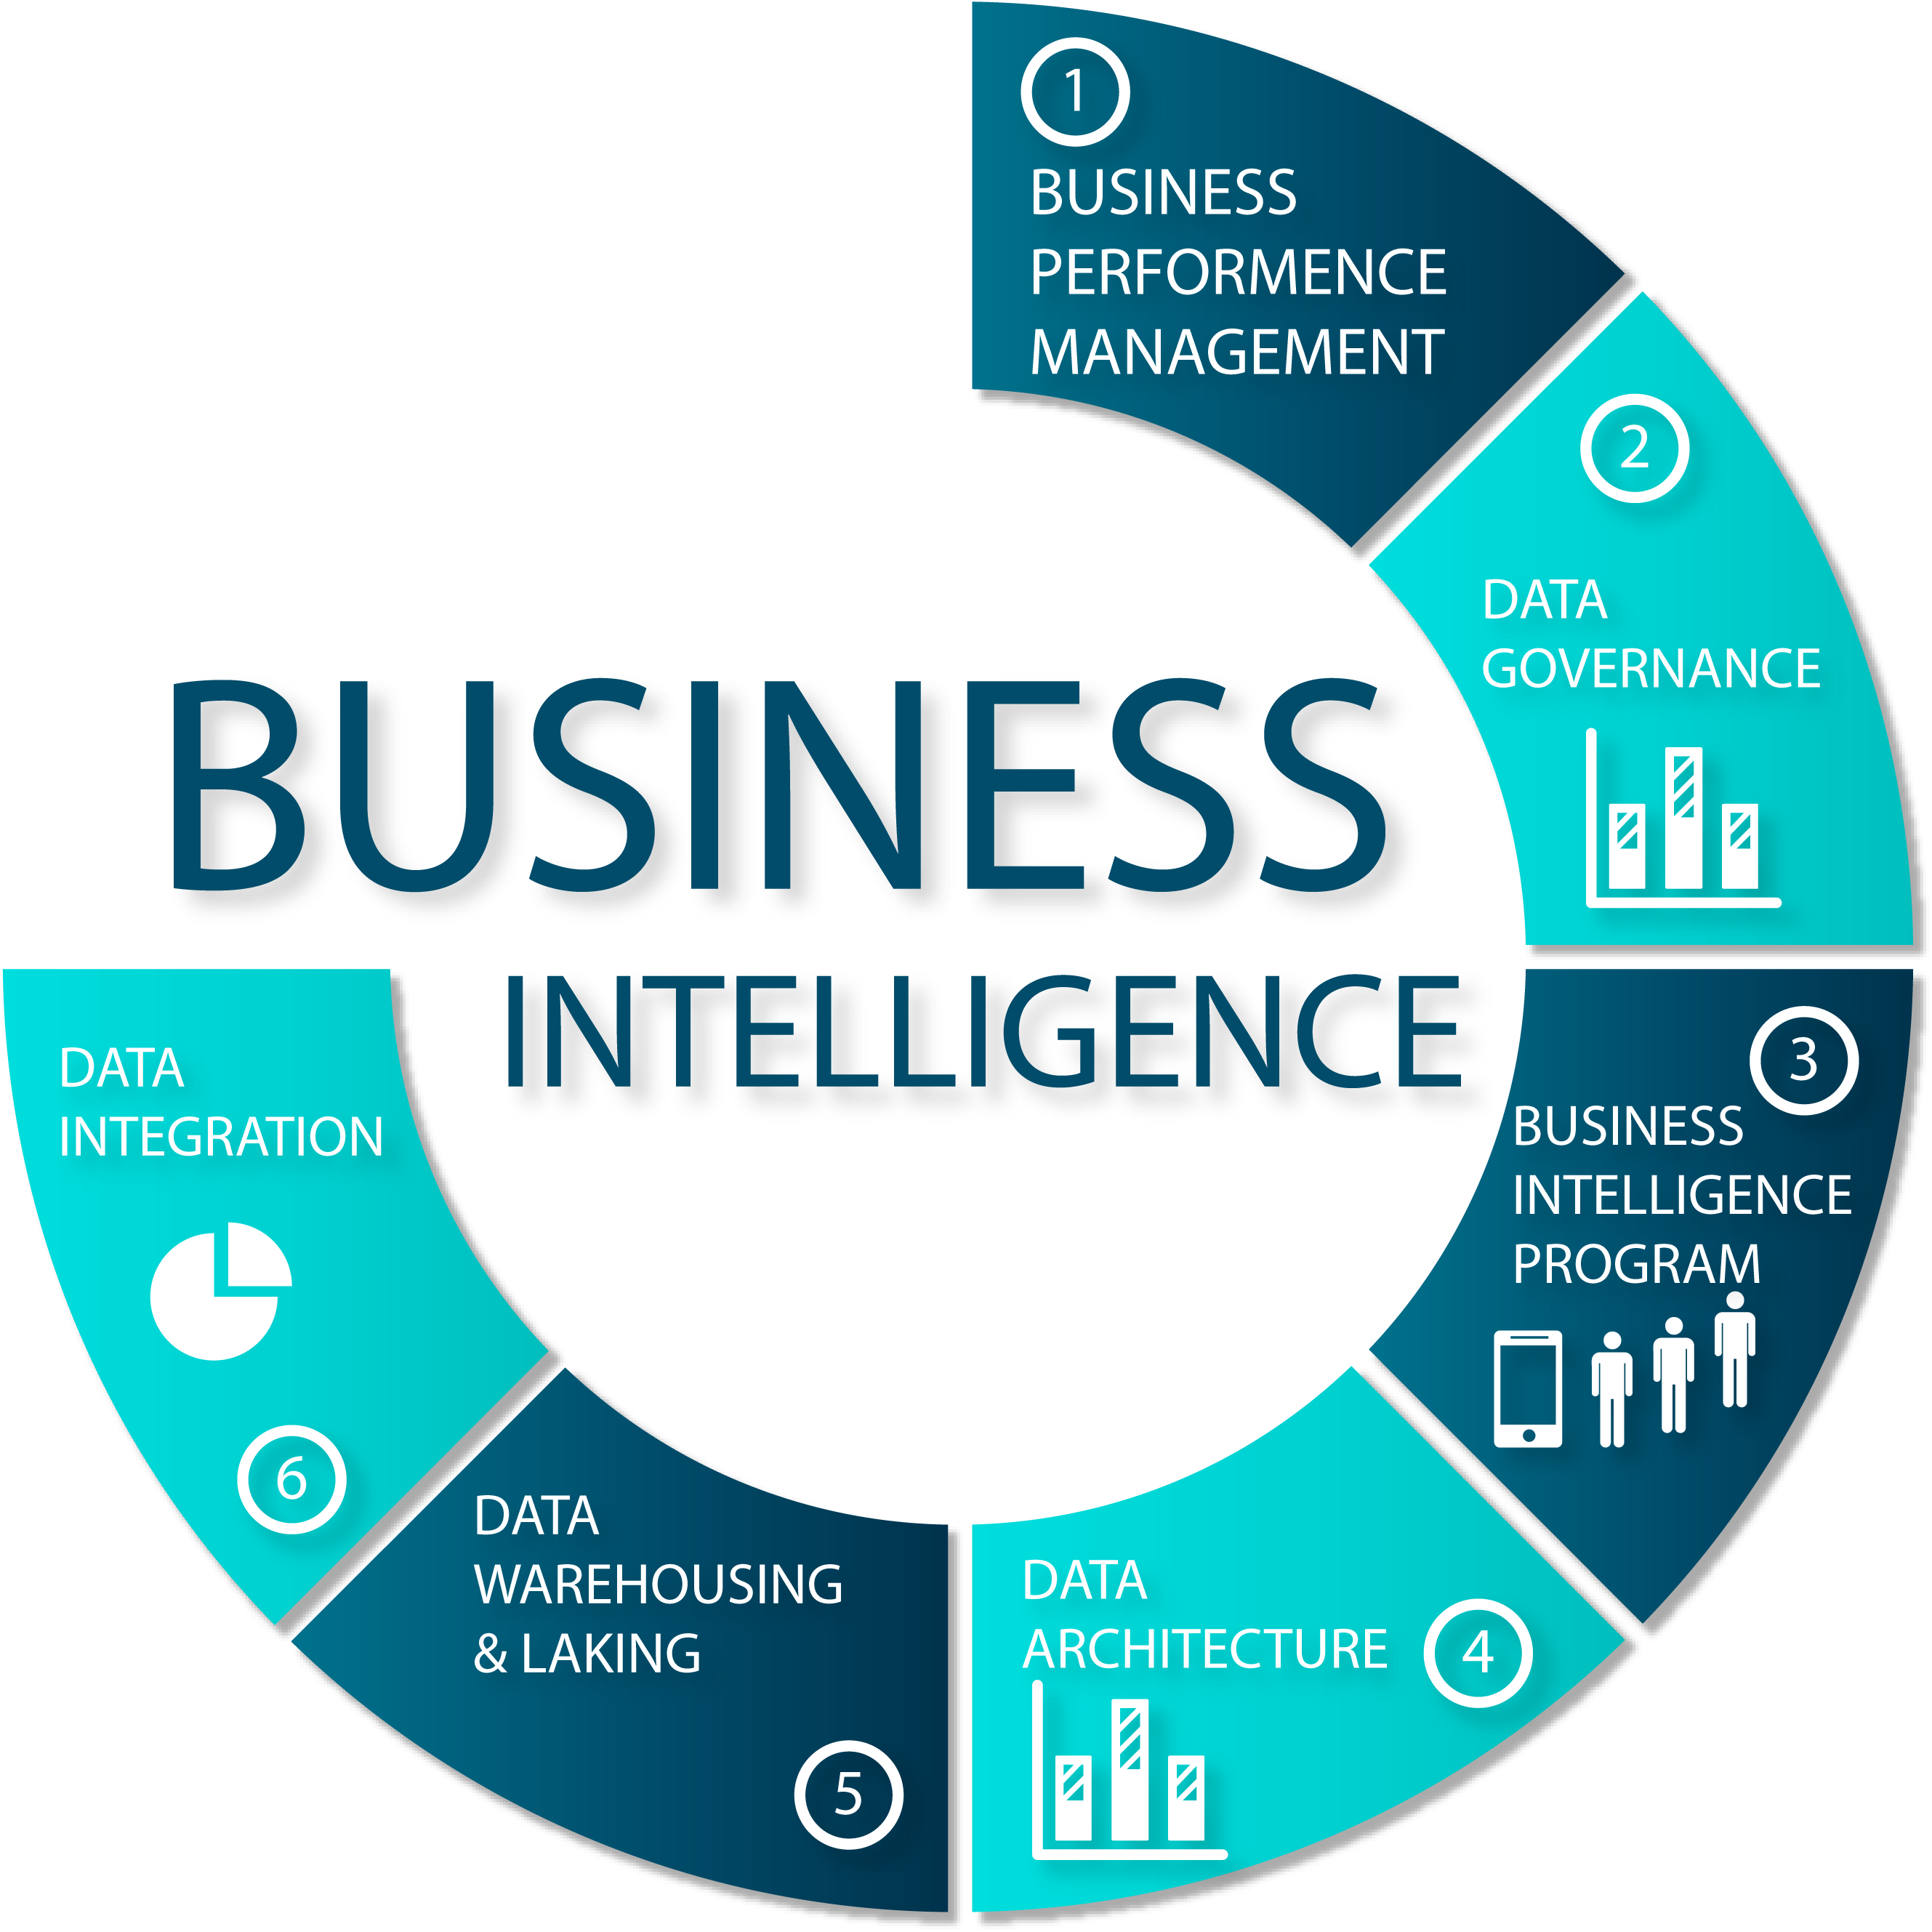 What are leading Business Intelligence platform in Saudi Arabia?